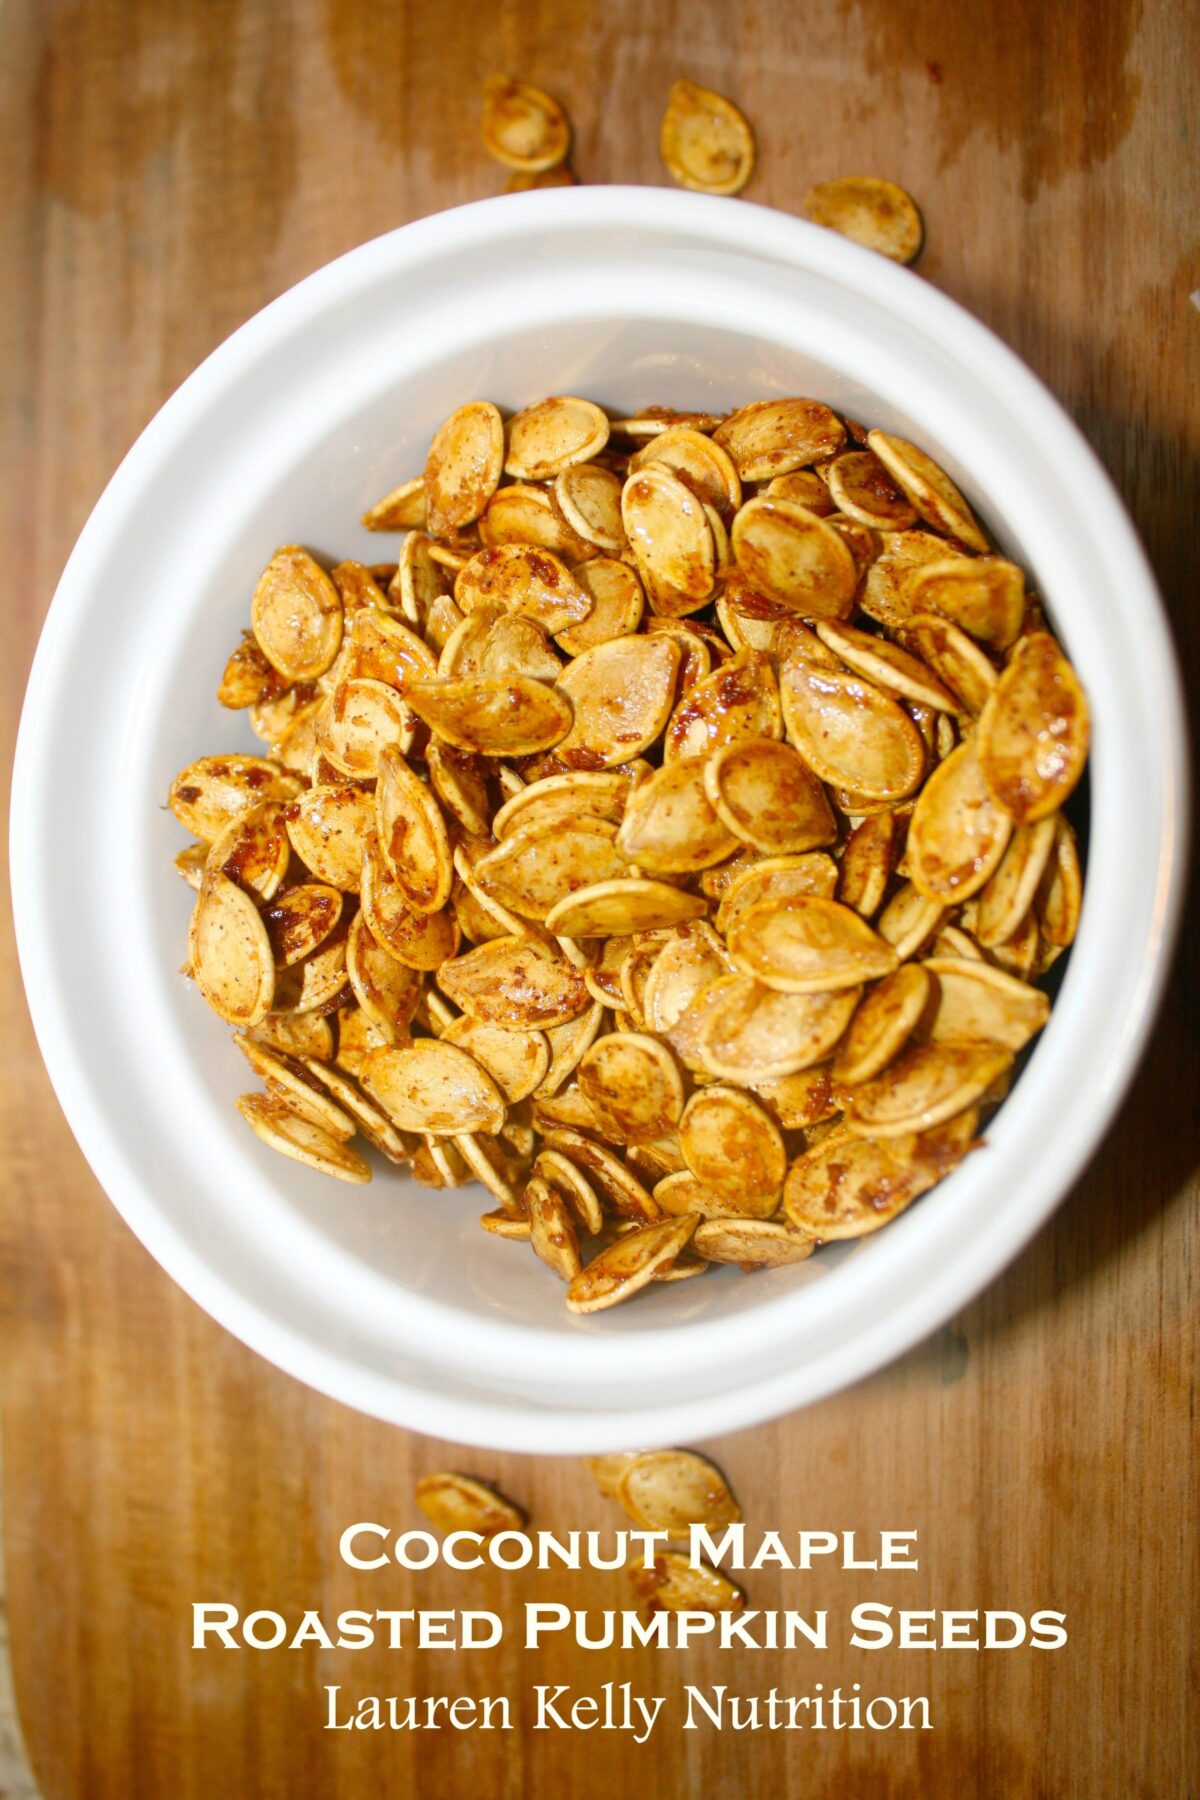 These Coconut Maple Roasted Pumpkin Seeds are so healthy, highly addictive and will make your house smell amazing!